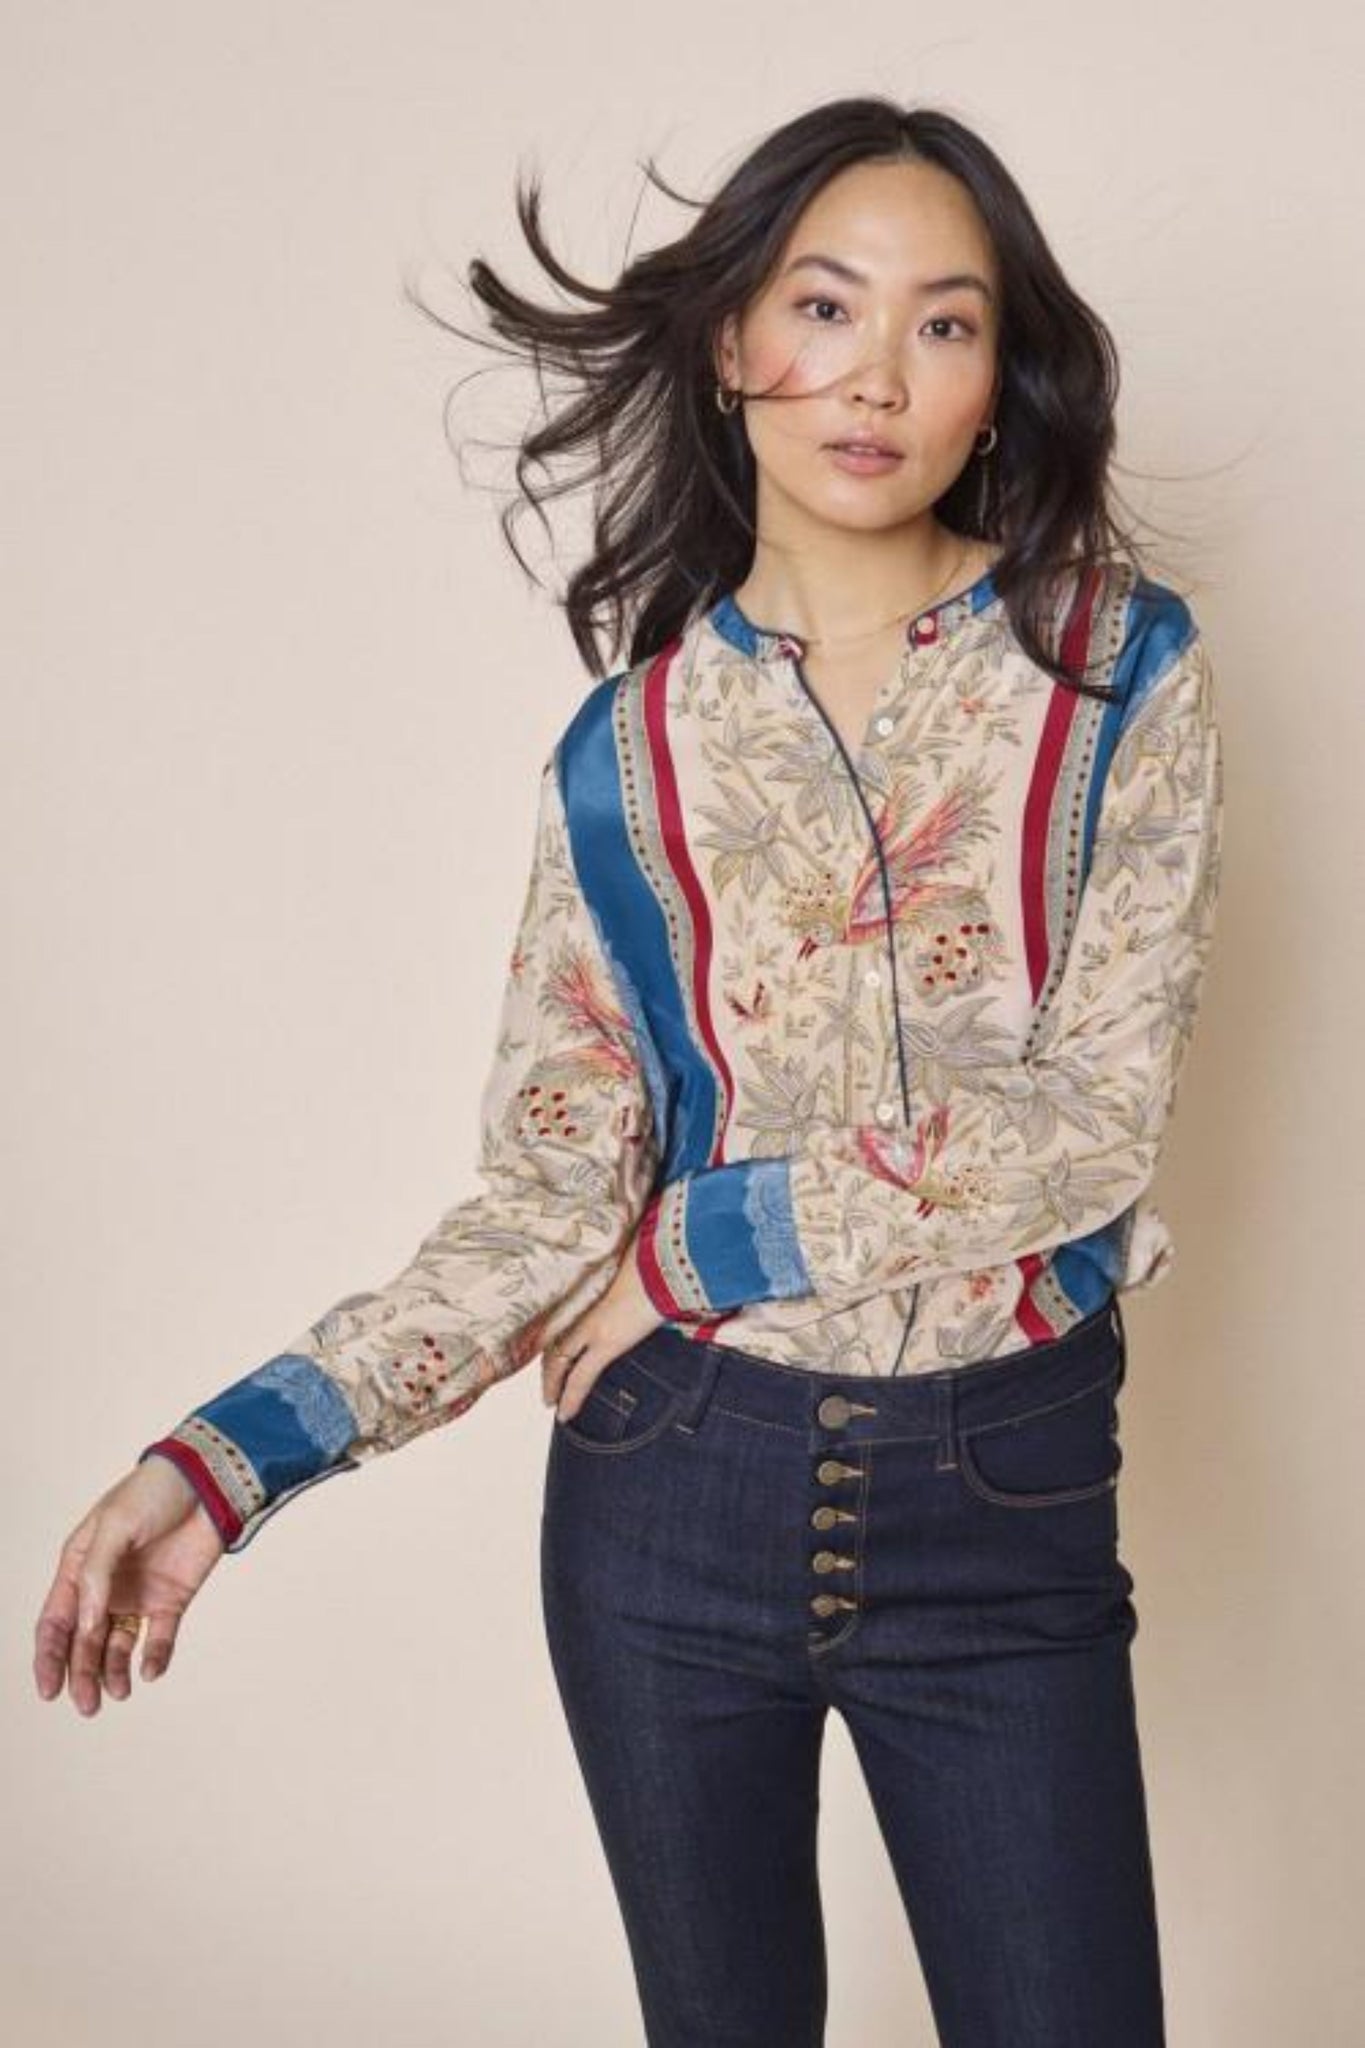 Buy Mos Mosh Talisa Bird Shirt online Australia. Beige Based button through blouse with royal blue and red stripes.